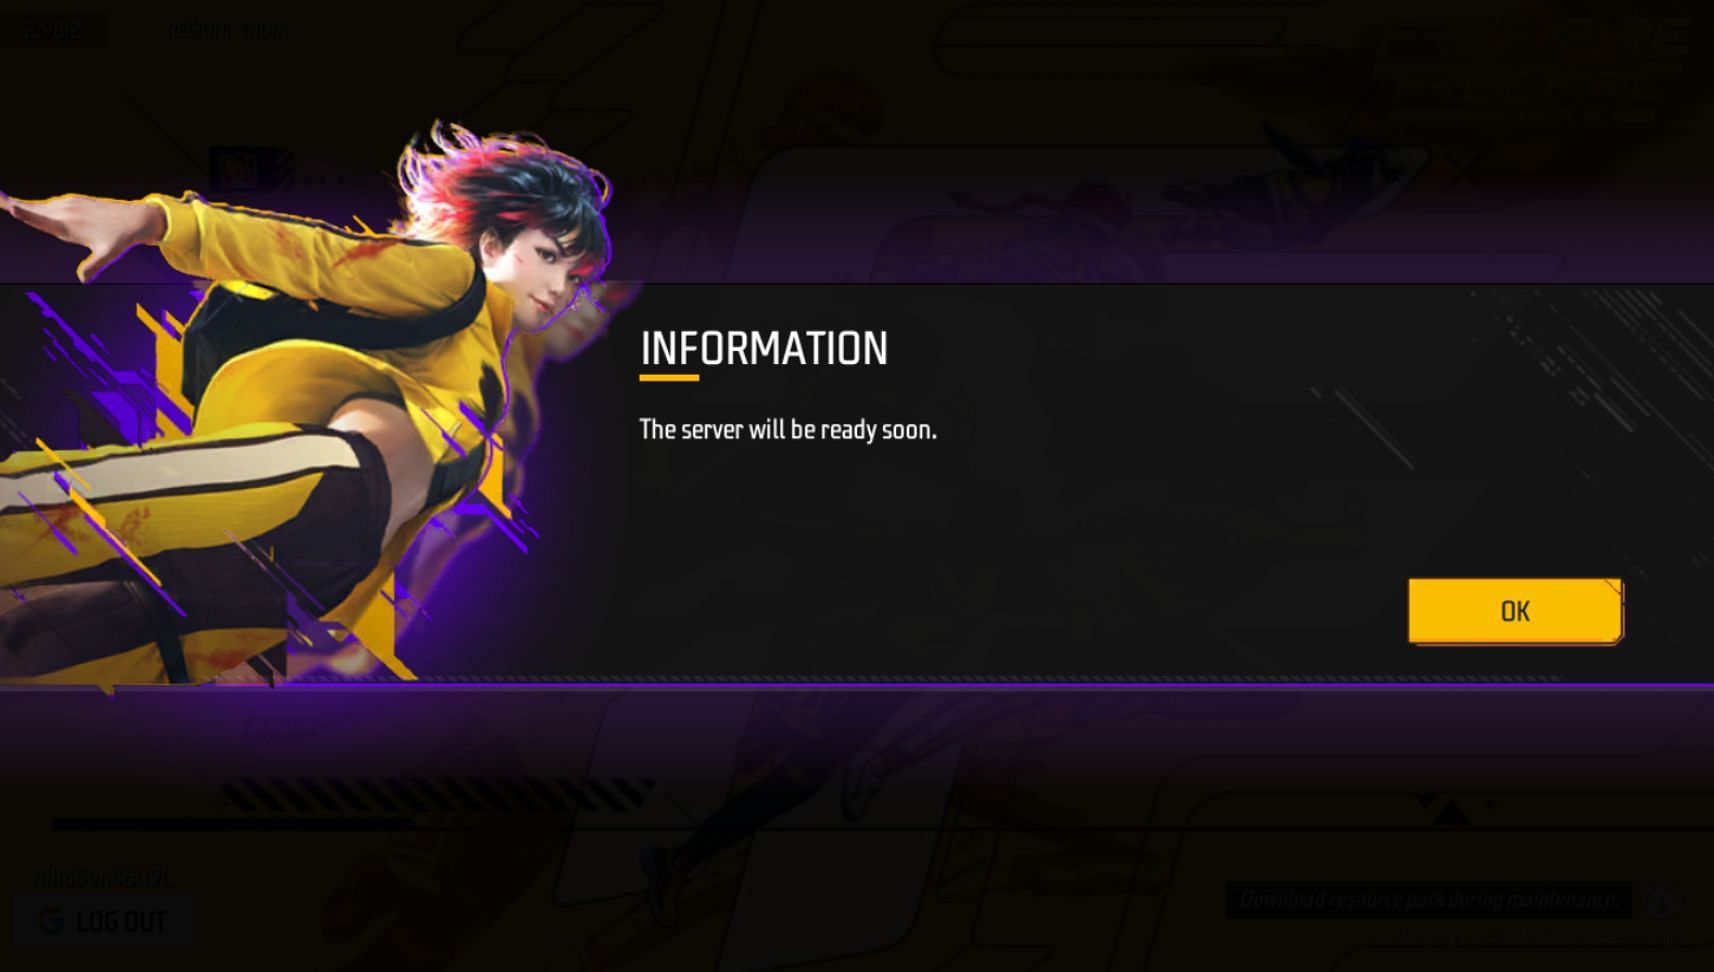 The server is not ready right now (Image via Garena)